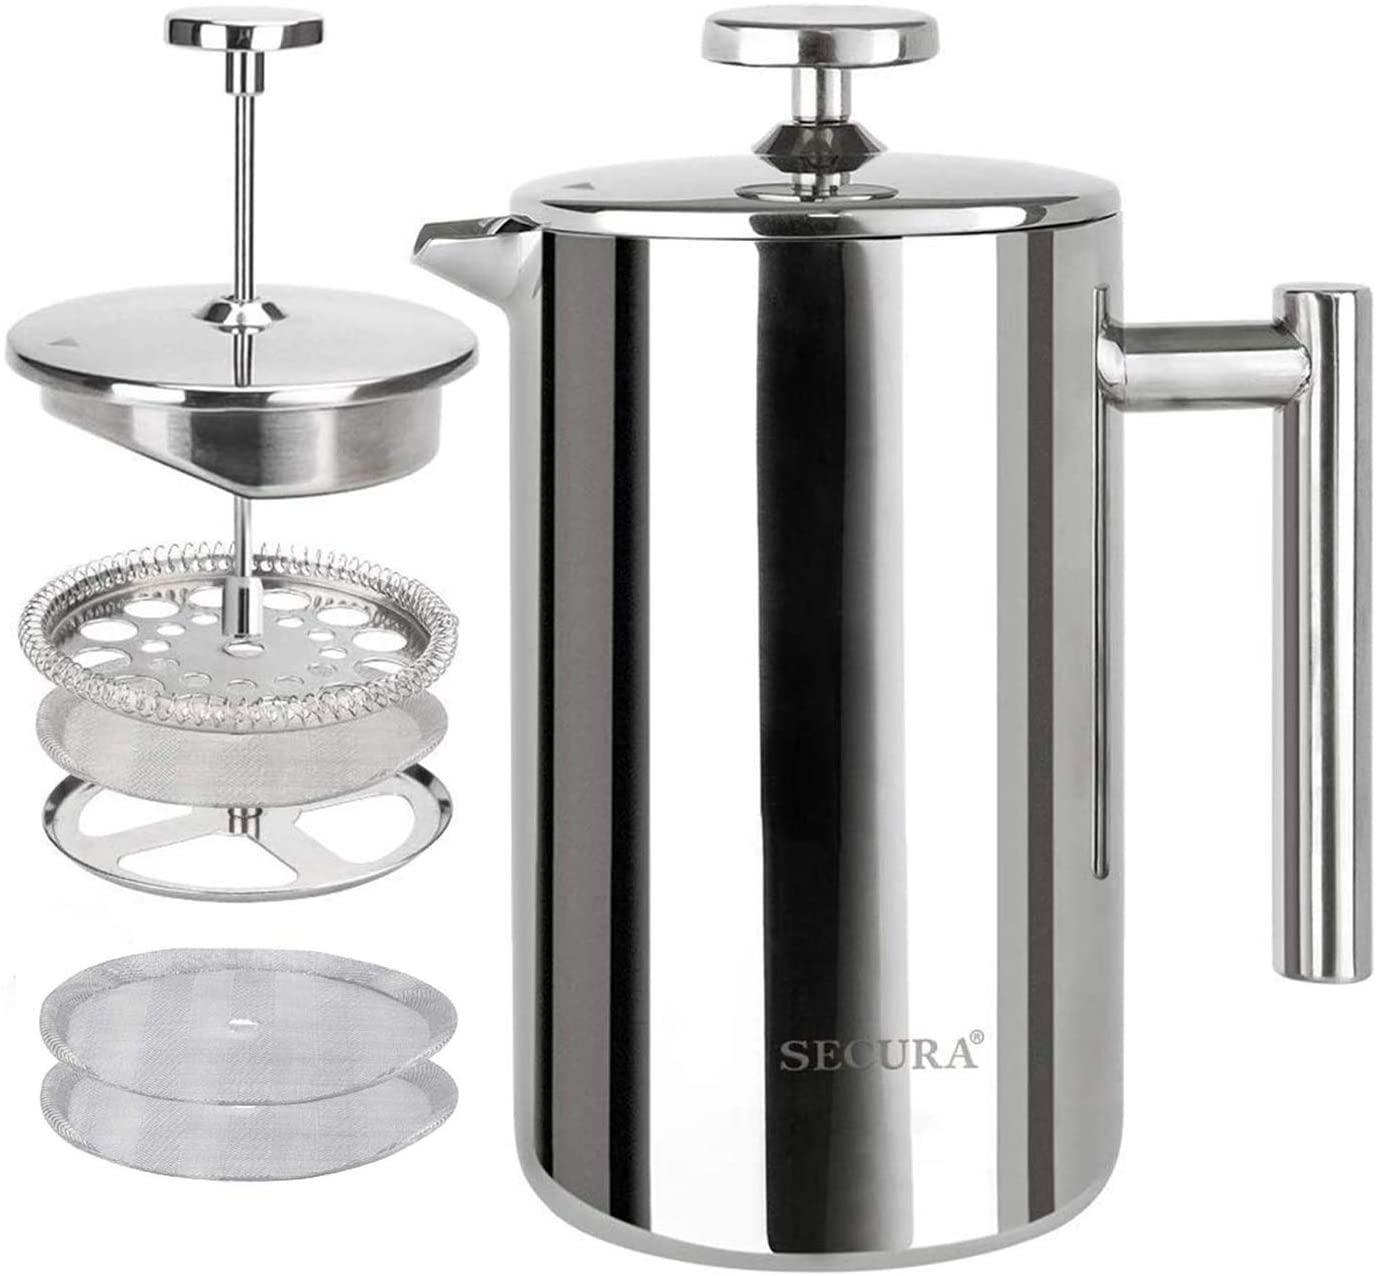 Secura French Press Coffee Maker, 304 Grade Stainless Steel Insulated Coffee Press with 2 Extra Screens, 50oz (1.5 Litre), Silver